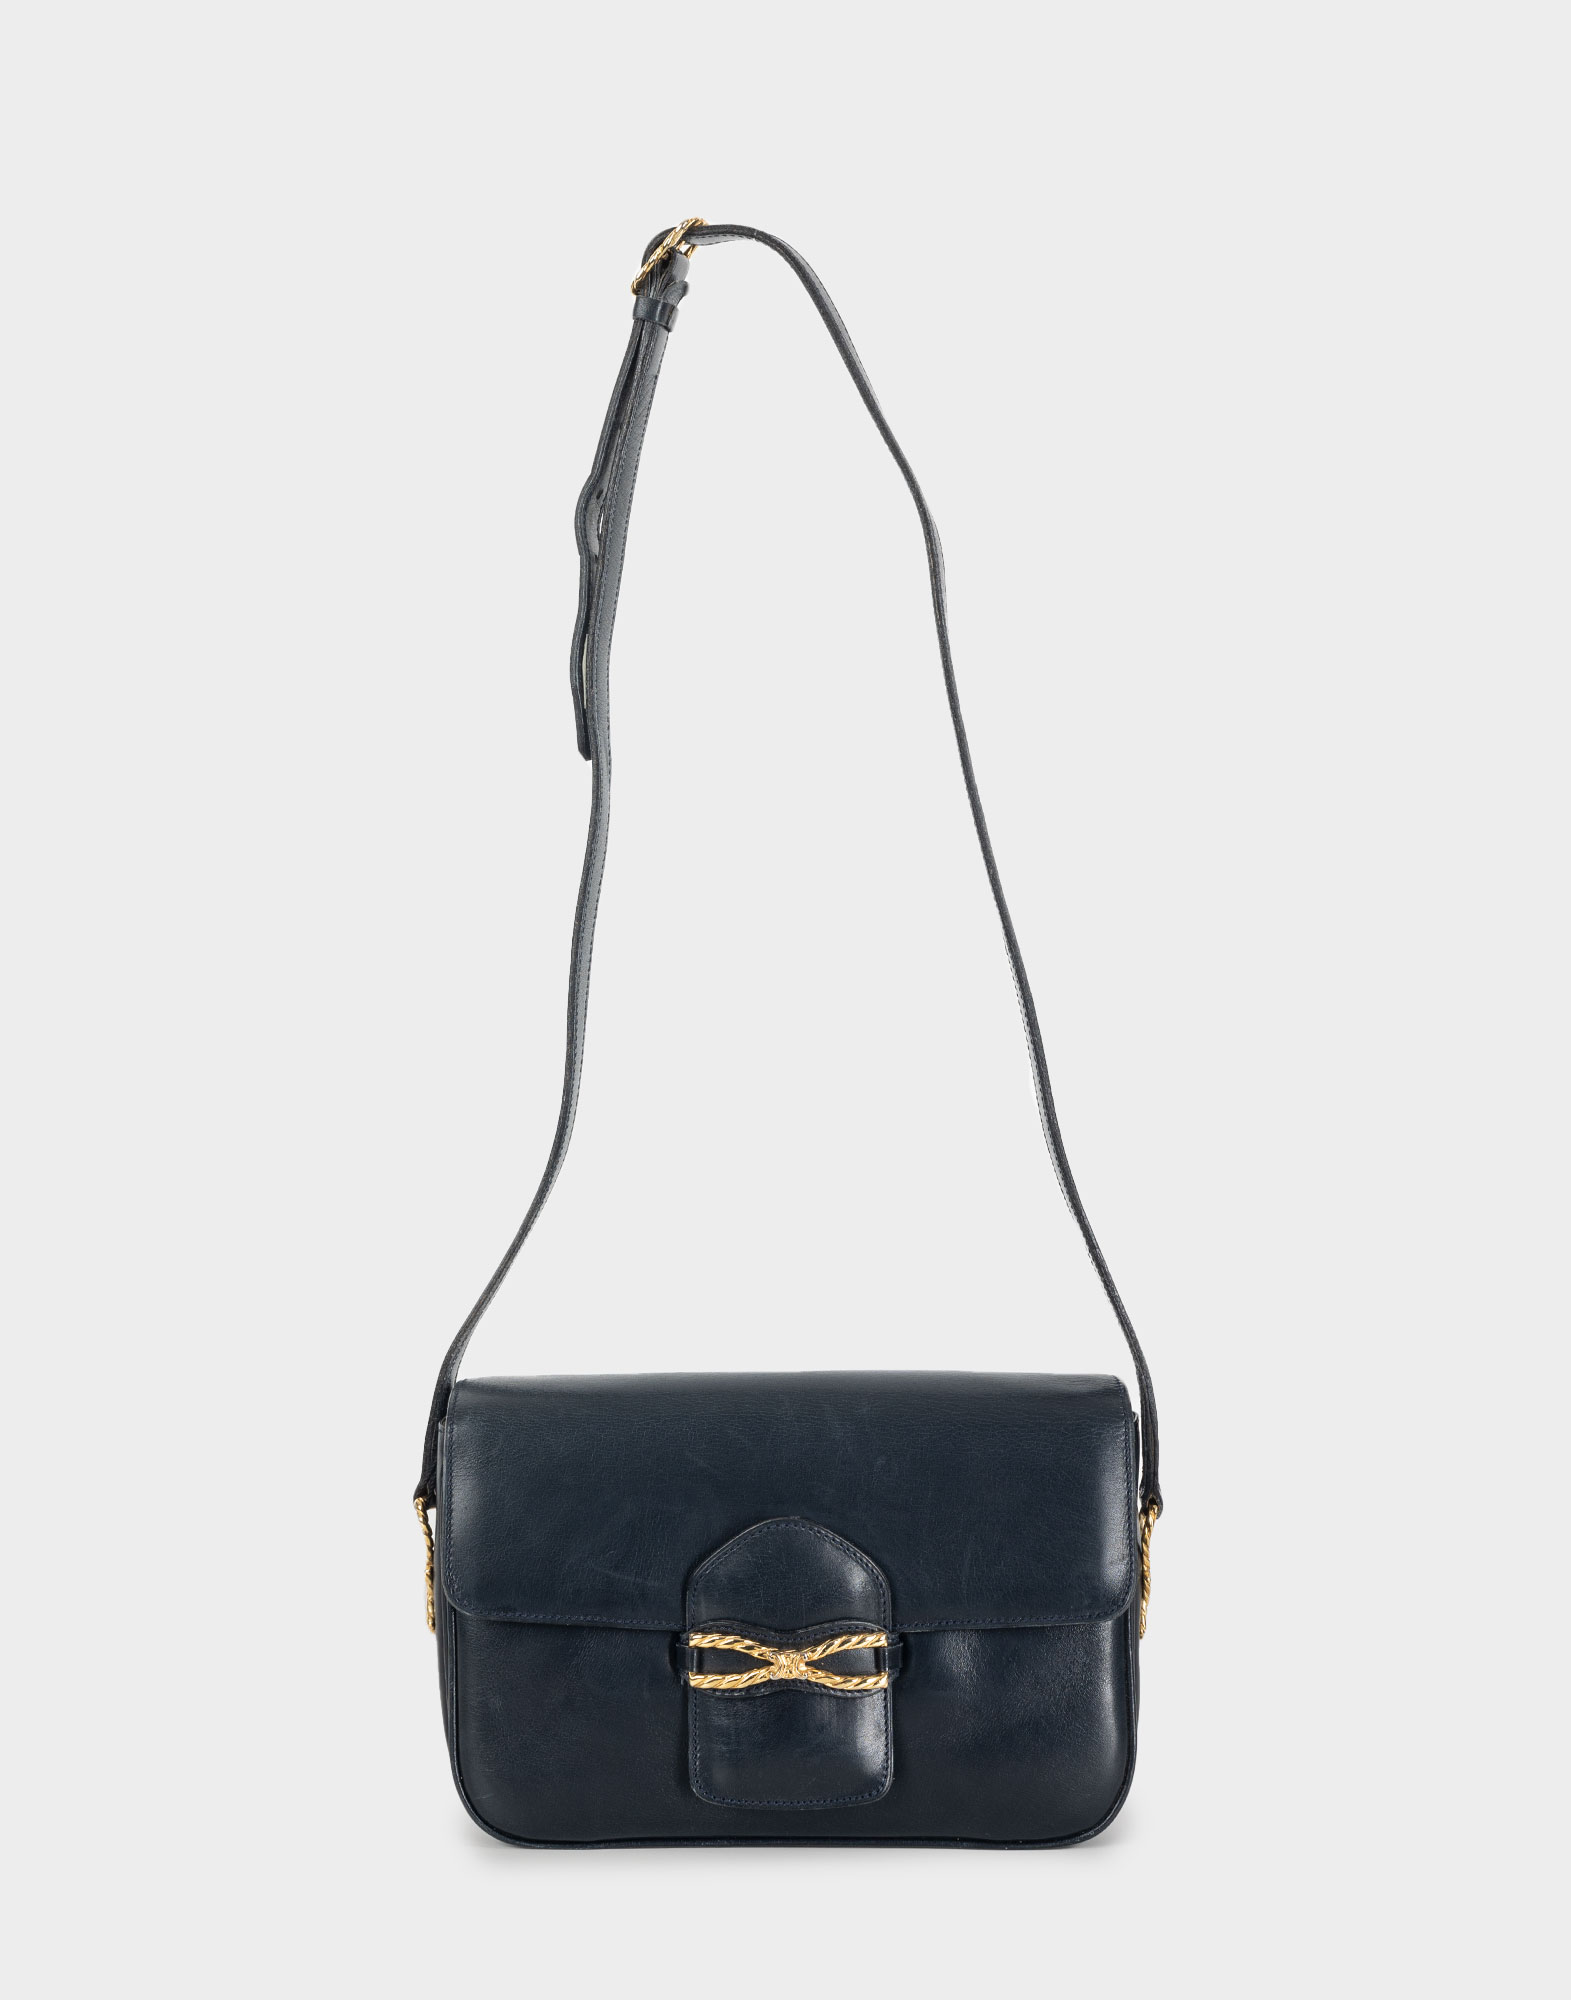 70s-80s blue leather shoulder bag with flap and gold detail on the front